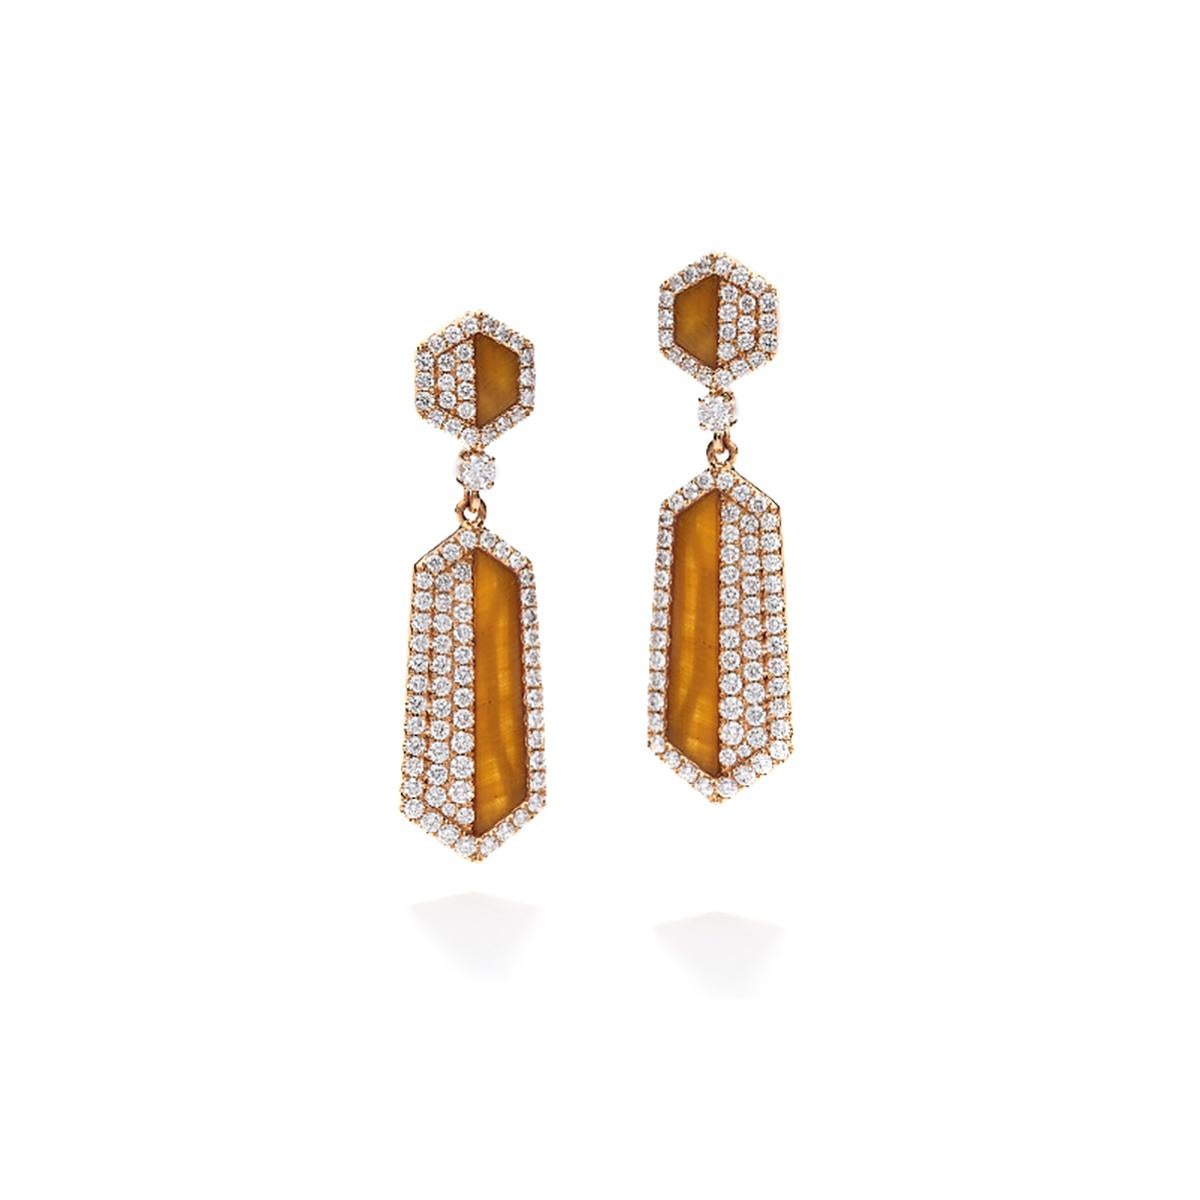 Earrings in 18kt pink gold set with 172 diamonds 1.66 cts and 4 tiger eye 2.79 cts